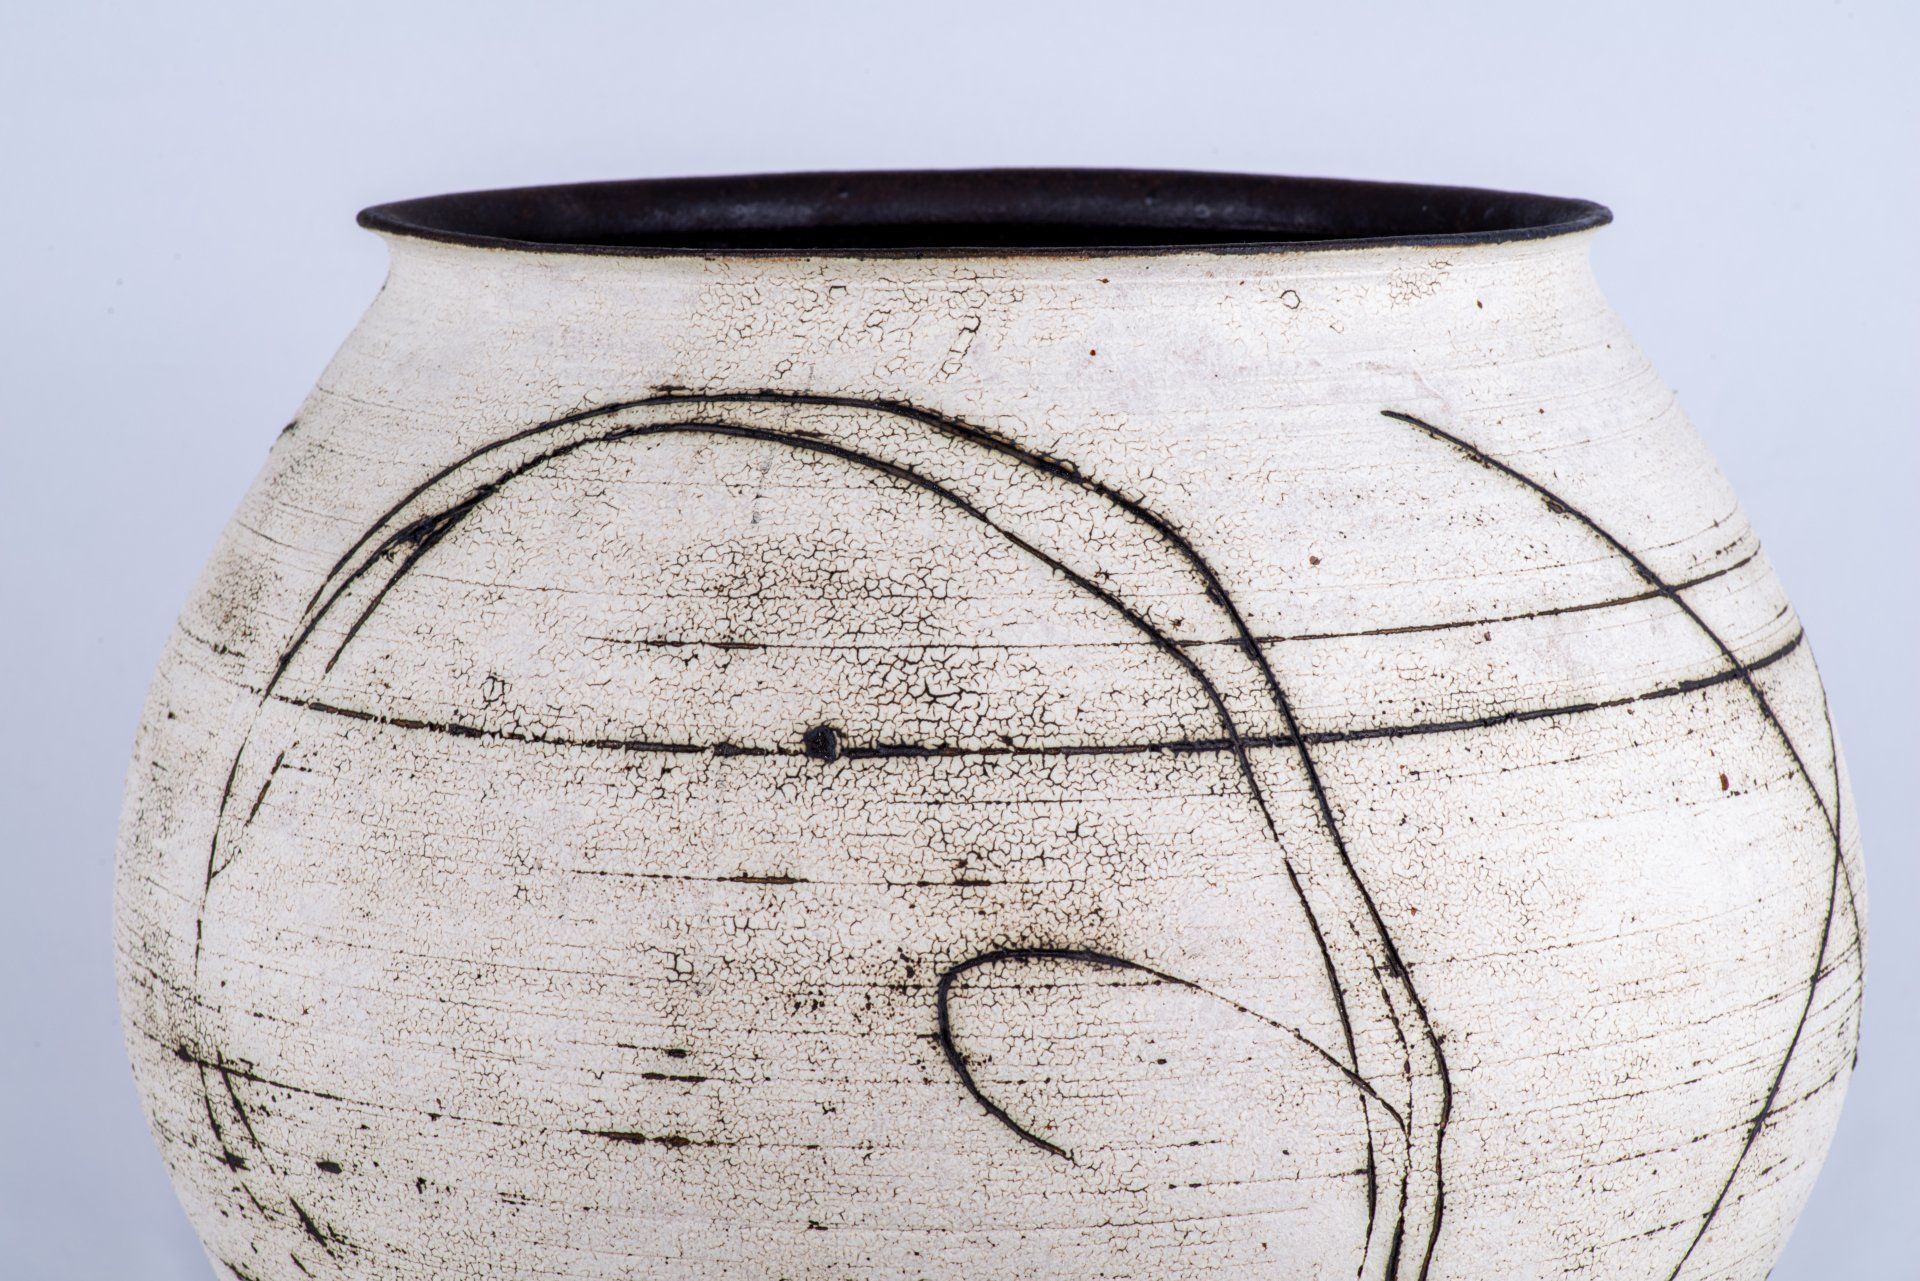 Large ceramic vase by Japanese artist Kansai Noguchi, adorned with black lines that stand out on a white background, with a black interior. This work is inspired by ancient ceramics.